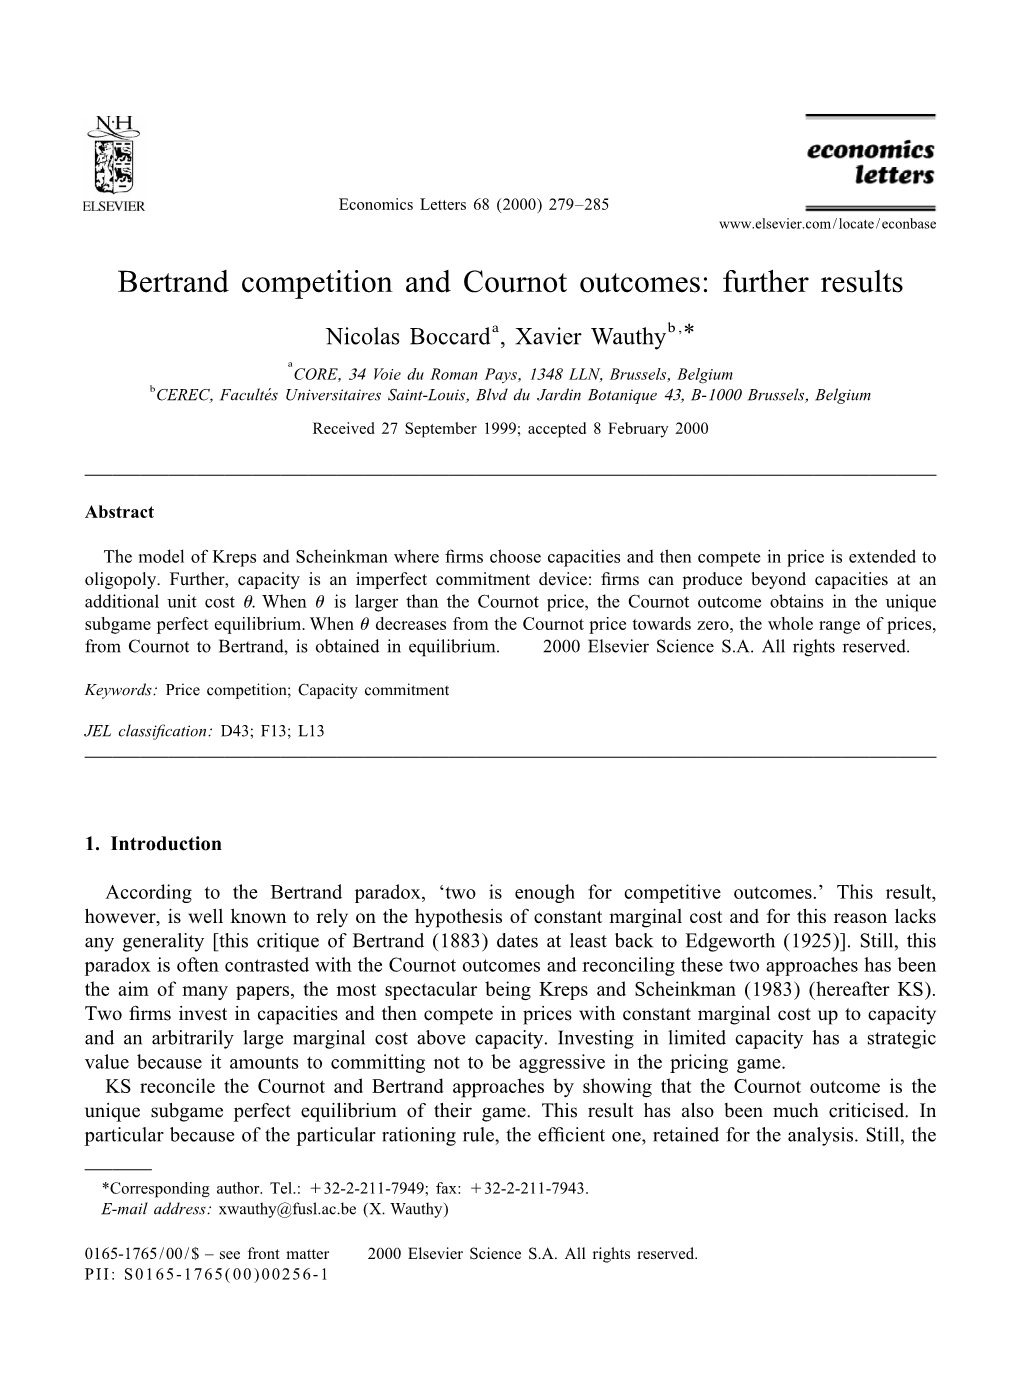 Bertrand Competition and Cournot Outcomes: Further Results